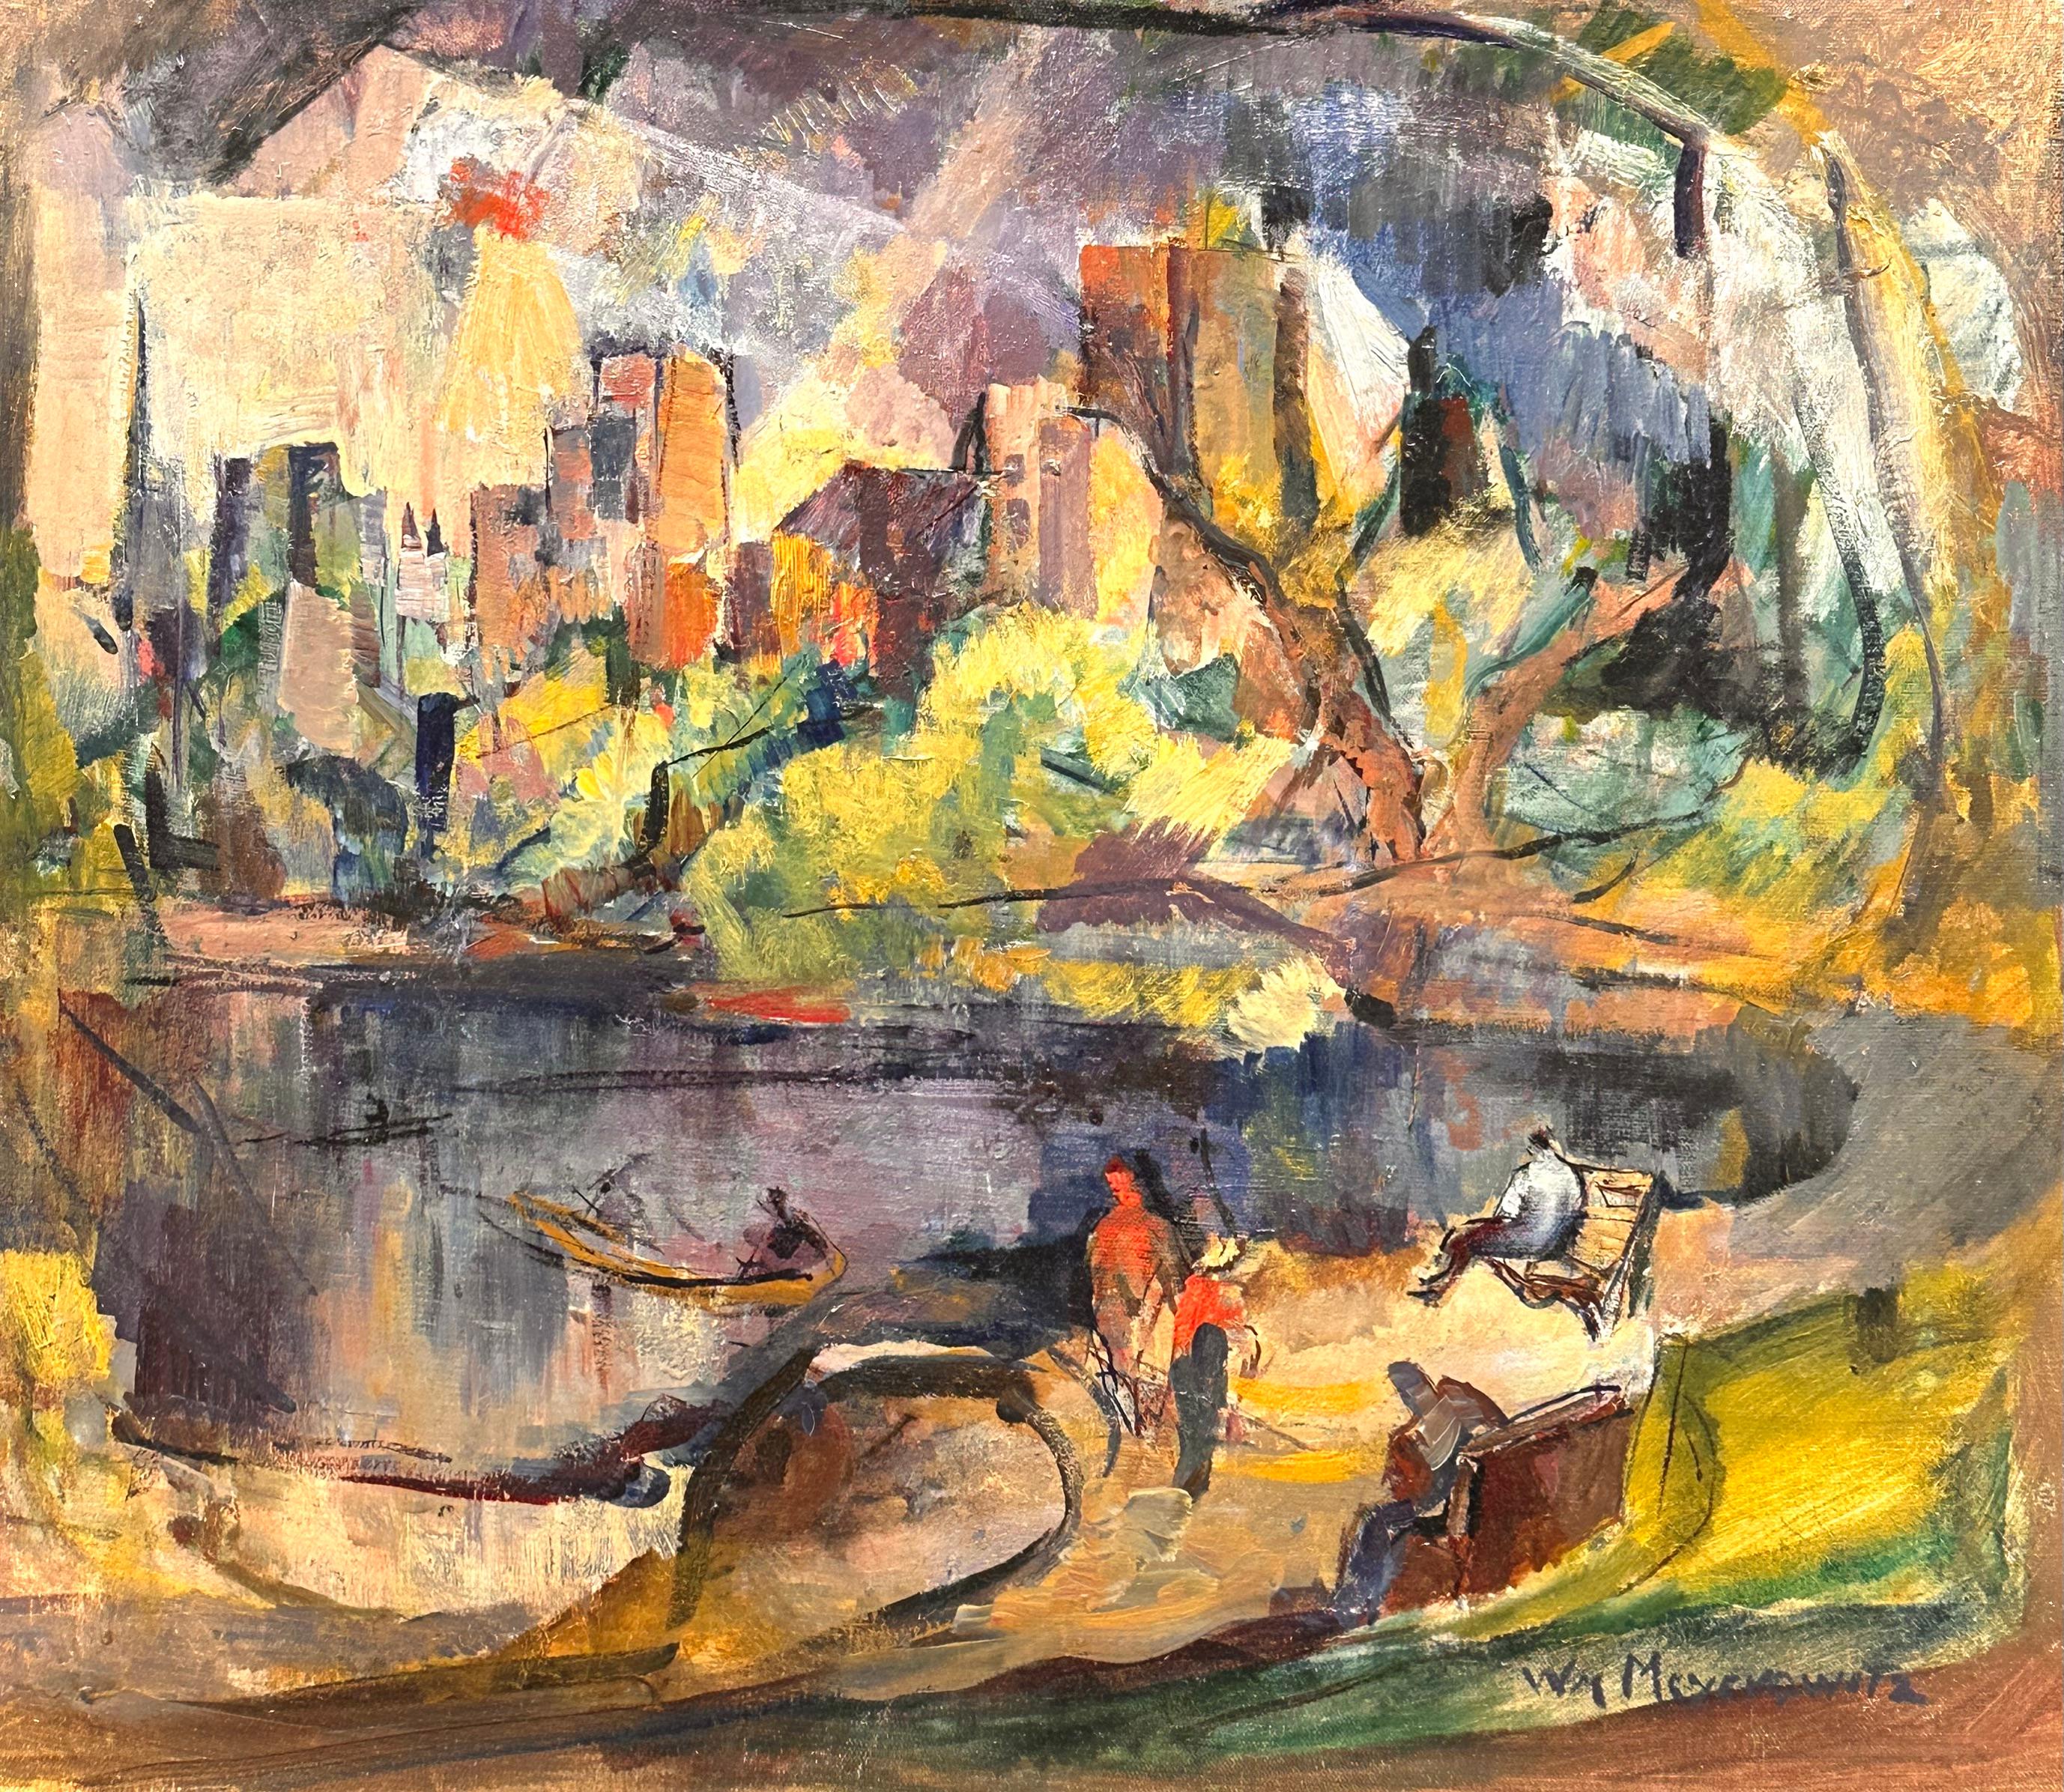 "The Lake in Central Park, 1947" - New York City Landscape, Cityscape